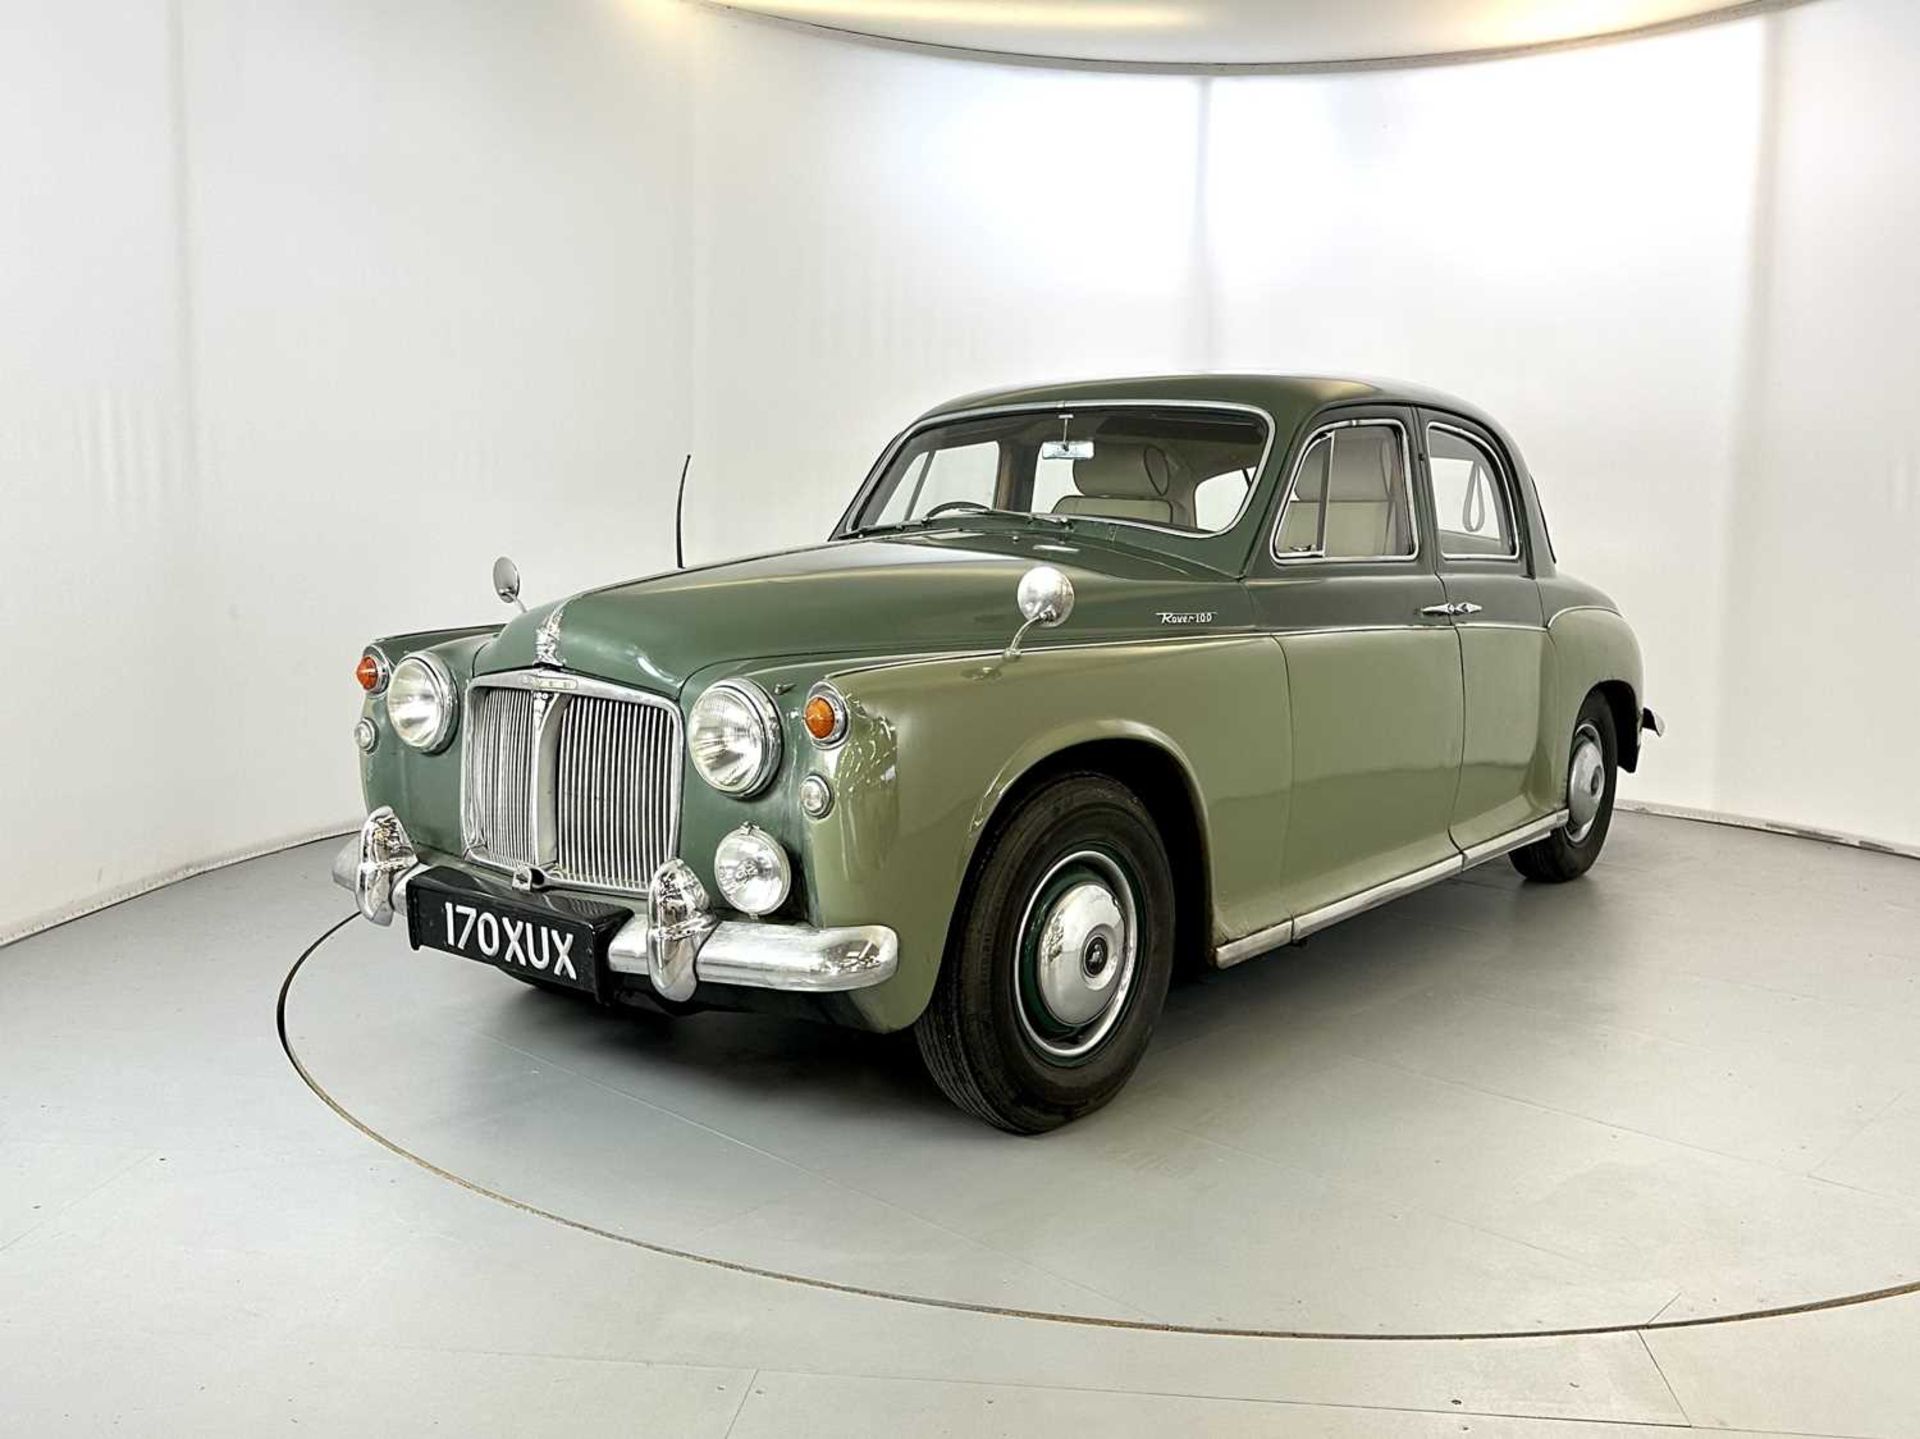 1959 Rover P4 100 - Image 3 of 31